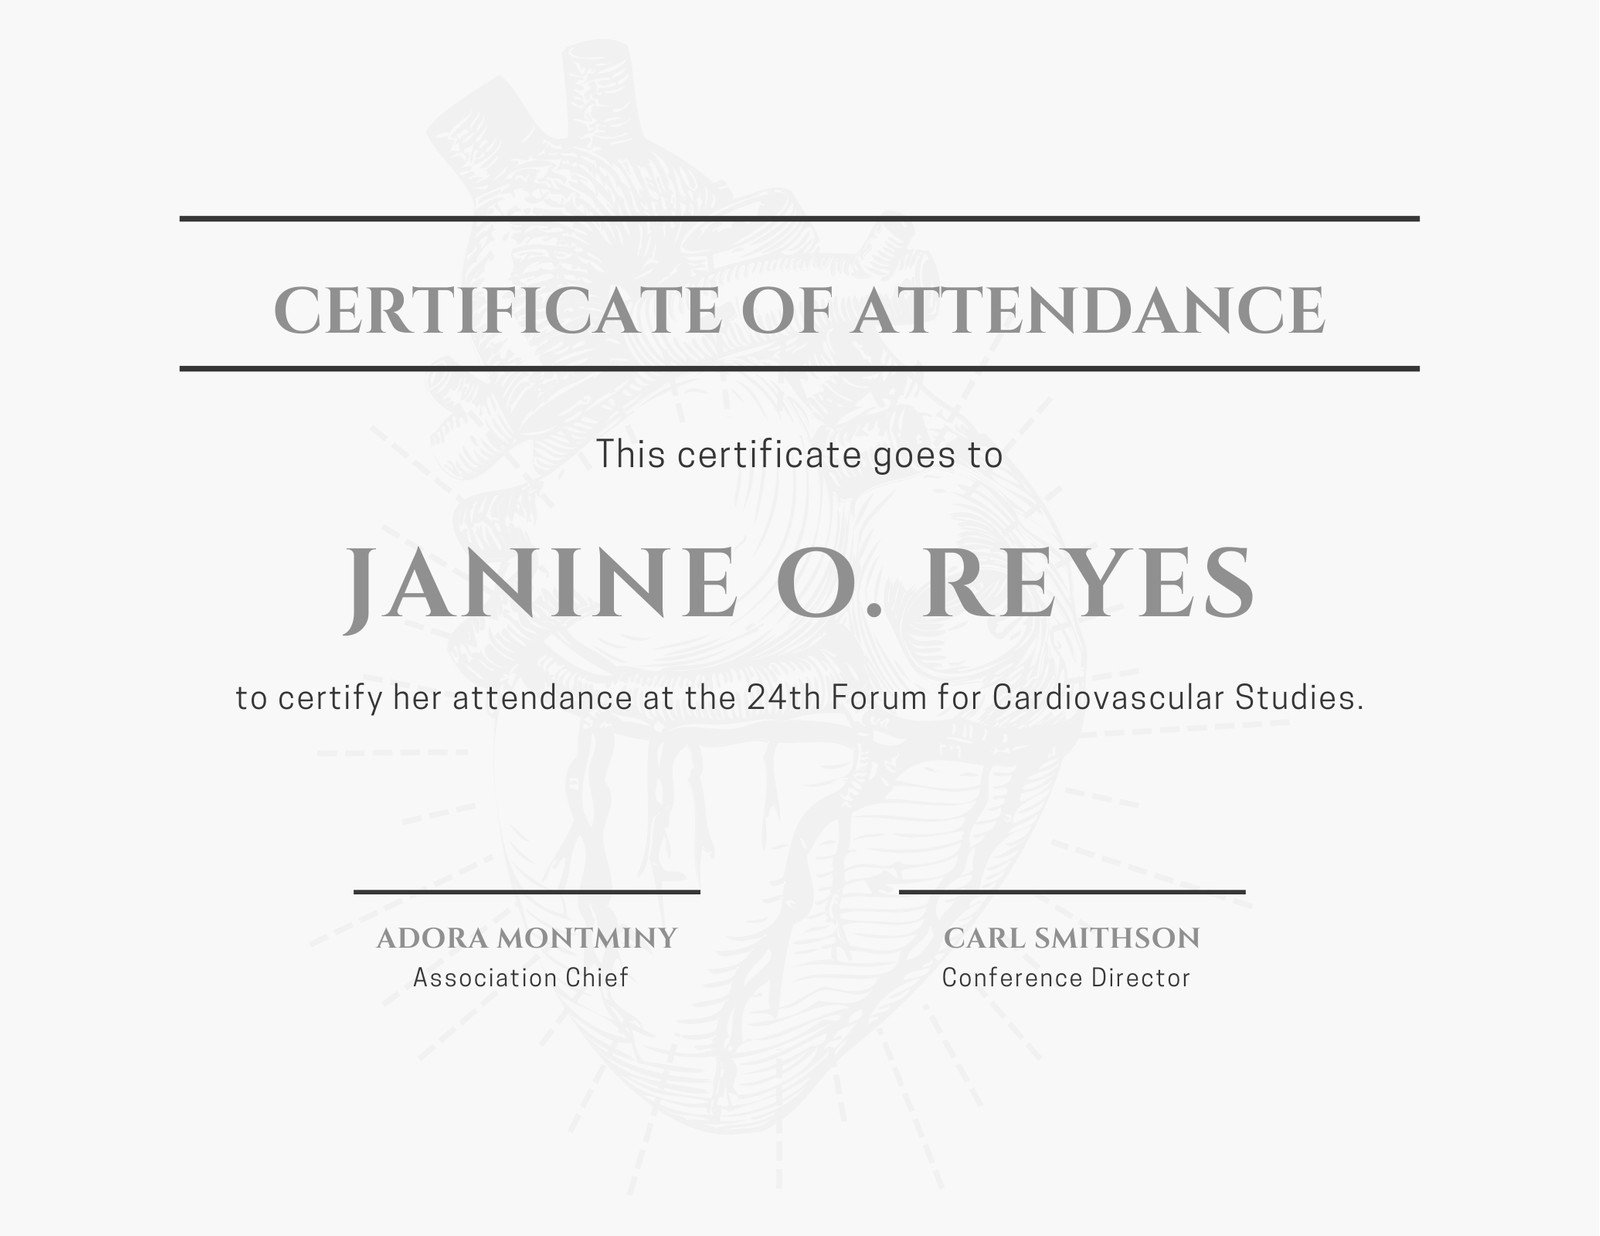 Customize 22+ Attendance Certificates Templates Online - Canva Within Conference Certificate Of Attendance Template